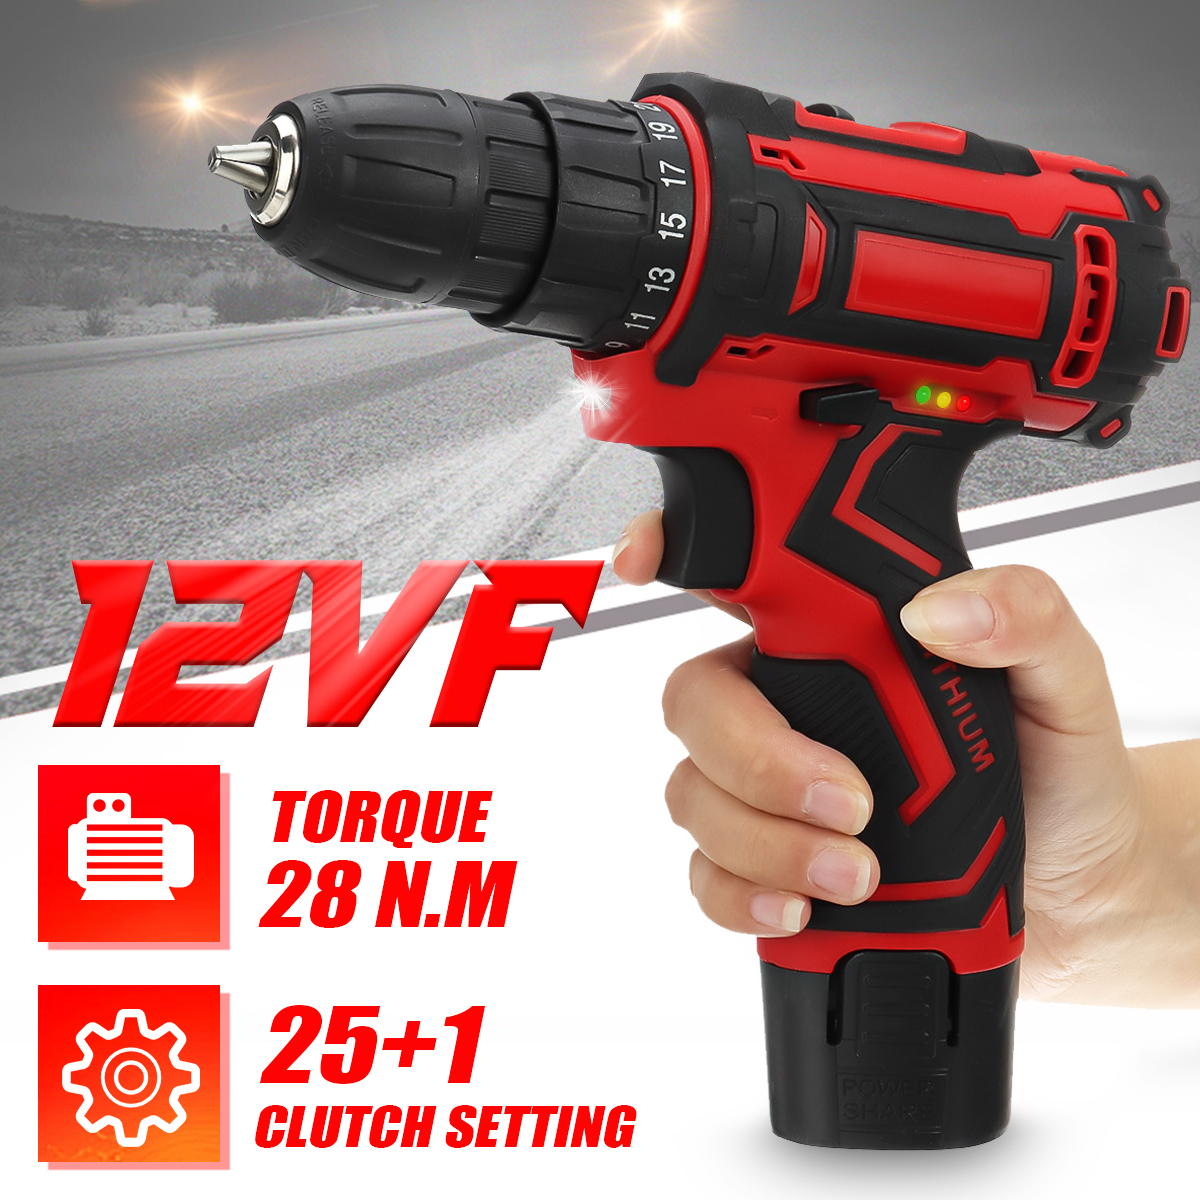 12V-300W-2-Speed-Cordless-Drill-Driver-251-Torque-1350-RPM-10mm-Electric-Screwdriver-W-12-Battery-1867946-1